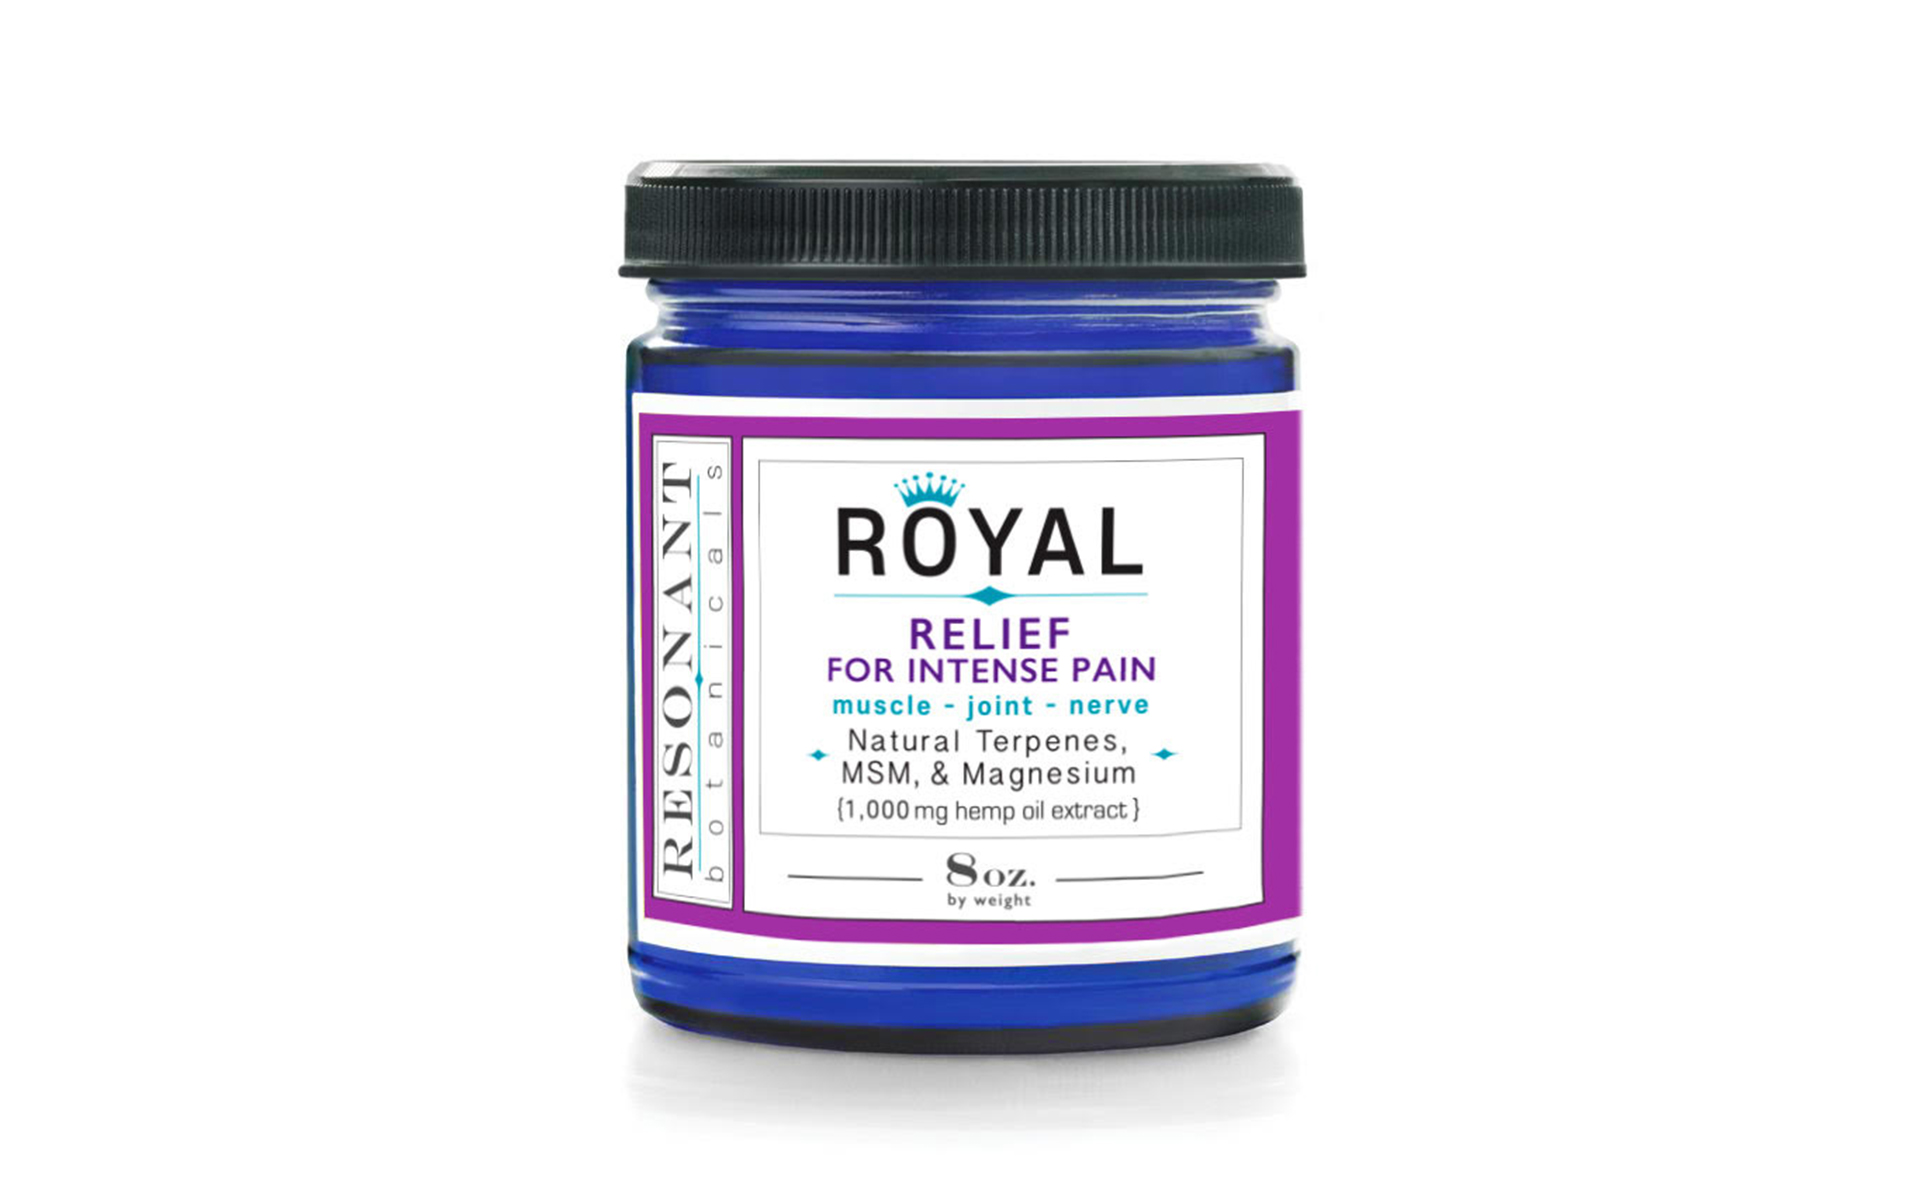 Resonant Botanical's Royal relief topical